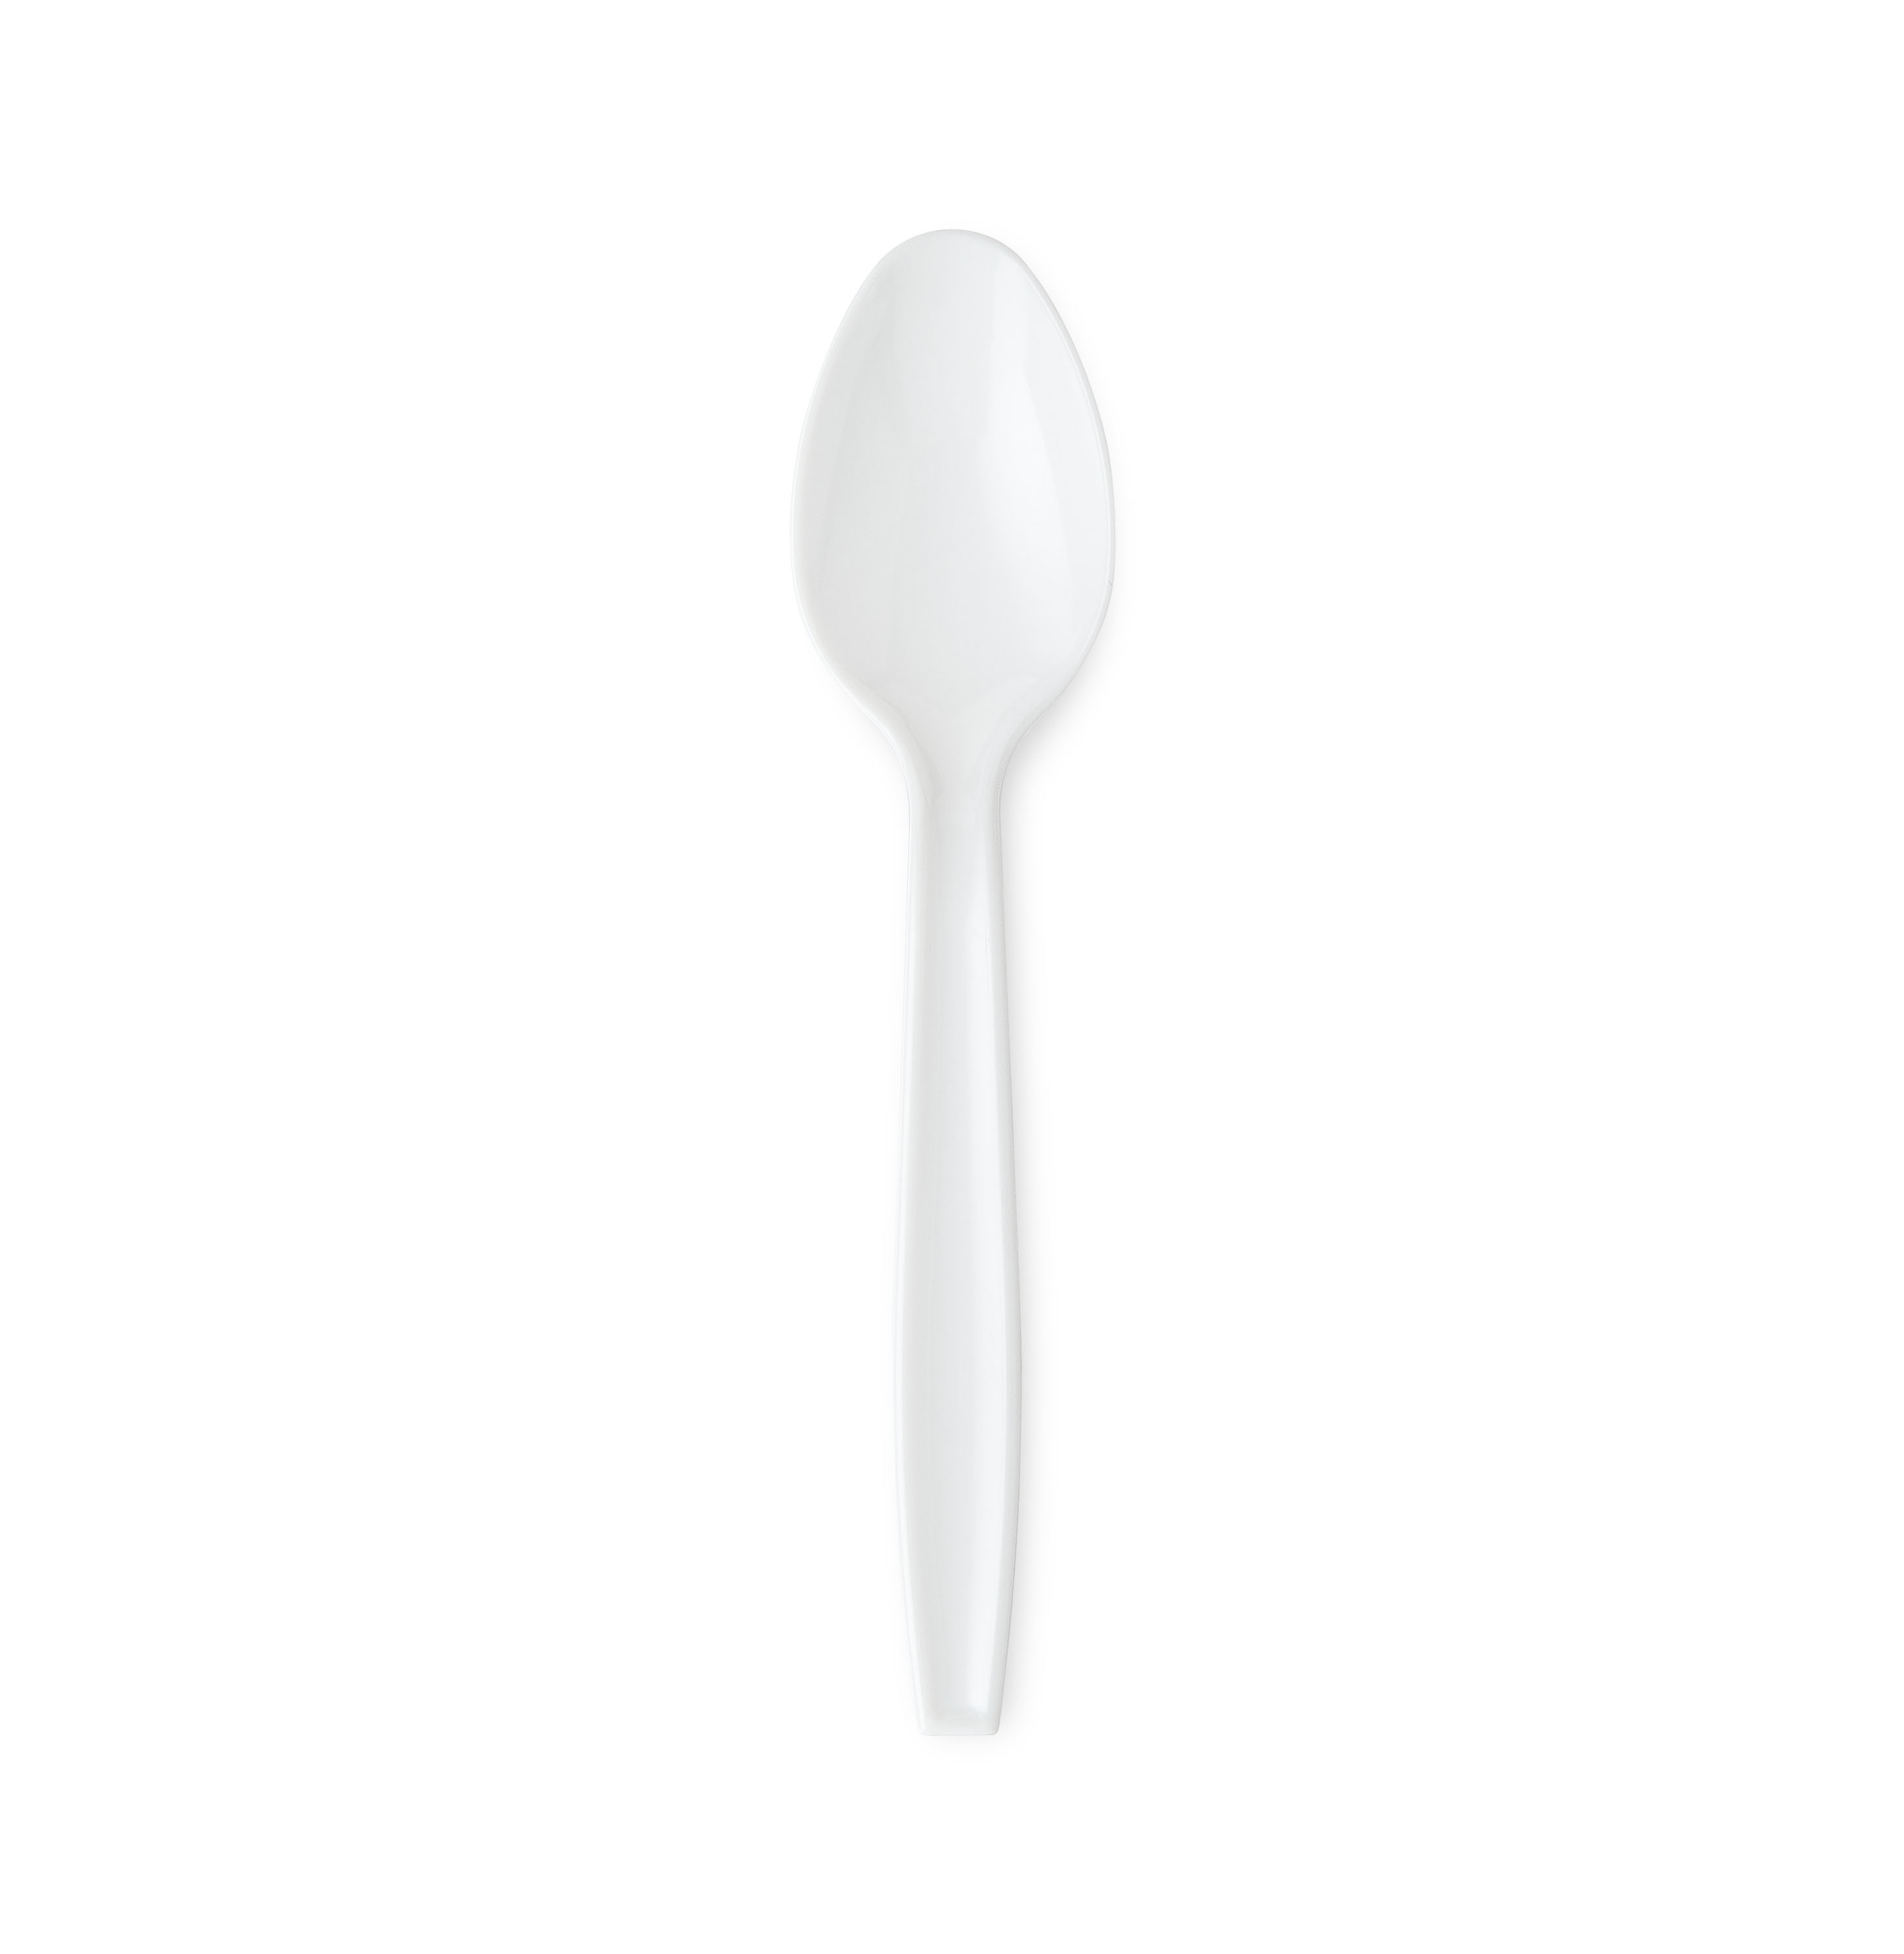 Great Value Everyday Disposable Plastic Spoons, White, 100 Count - image 4 of 7